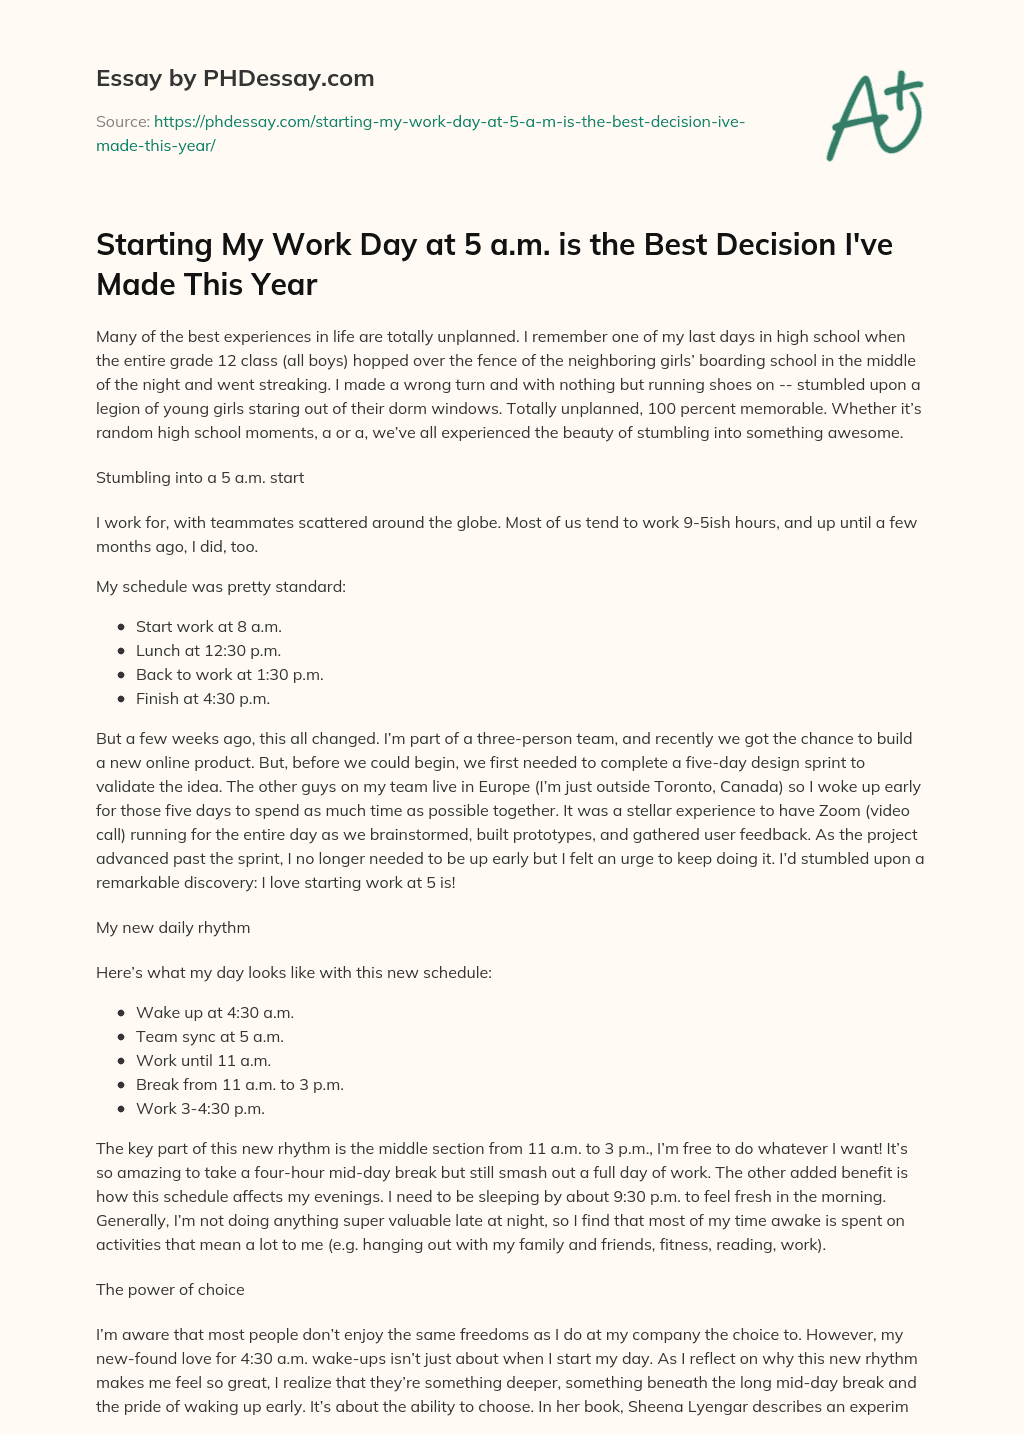 Starting My Work Day at 5 a.m. is the Best Decision I’ve Made This Year essay